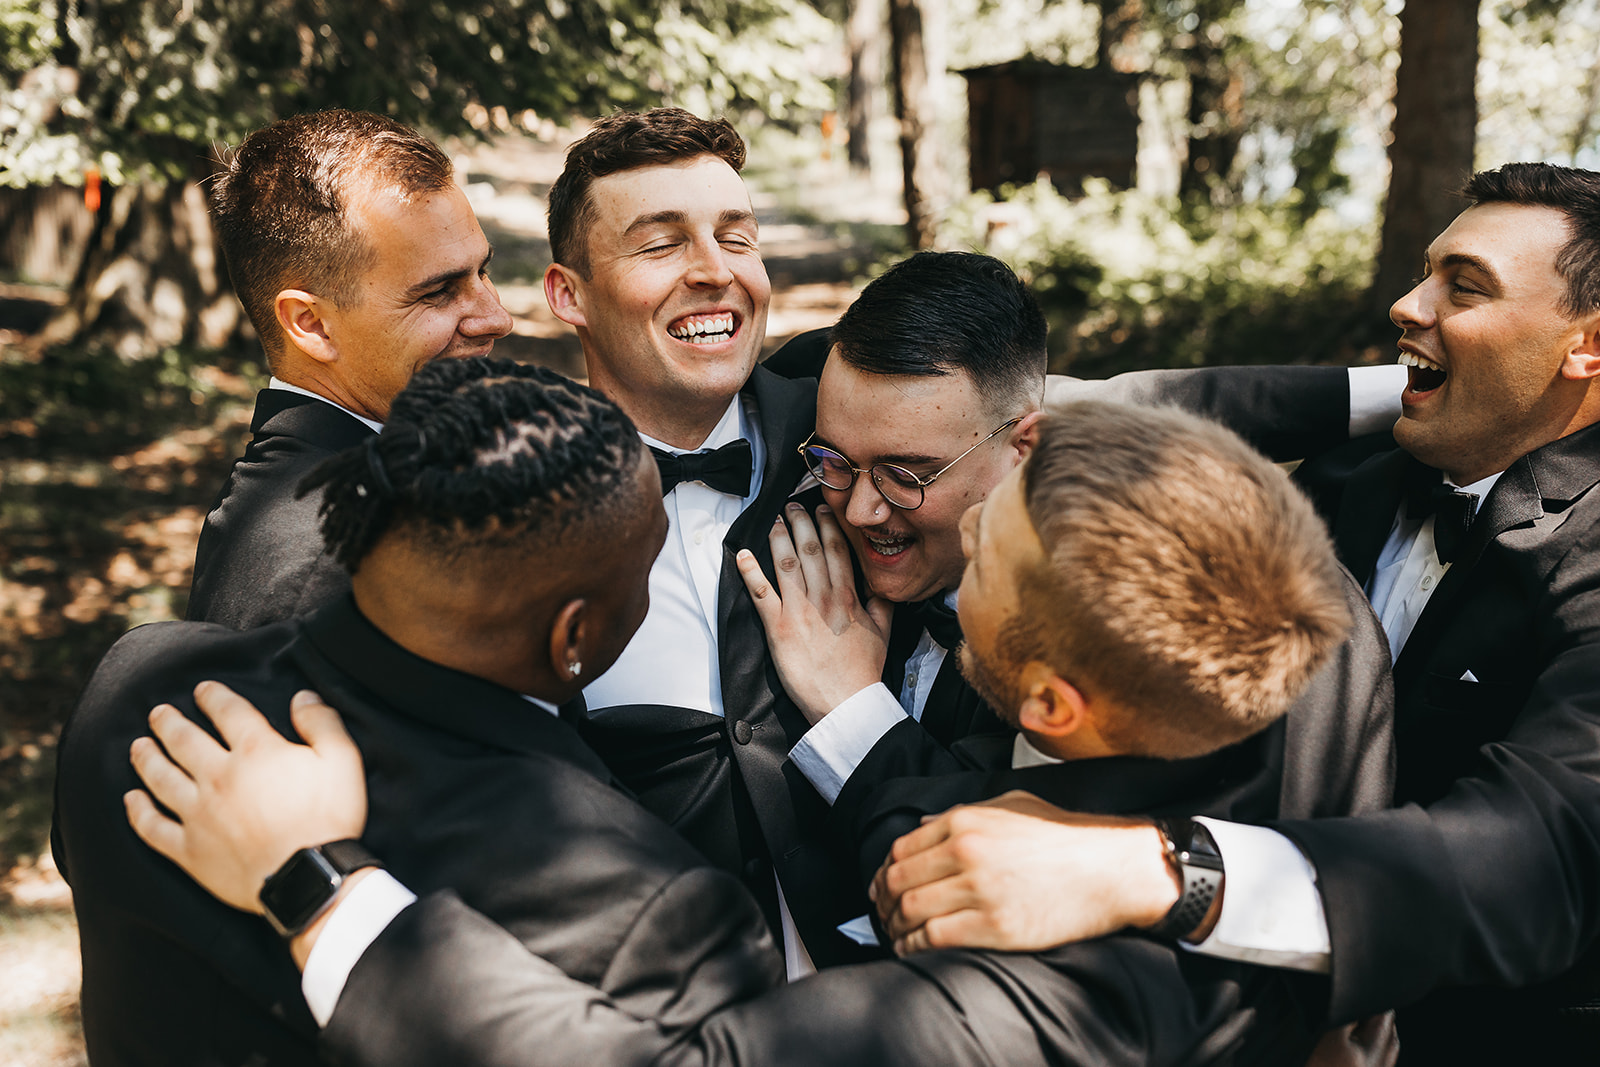 Groom and groomsmen messing around before wedding ceremony at private lake house.